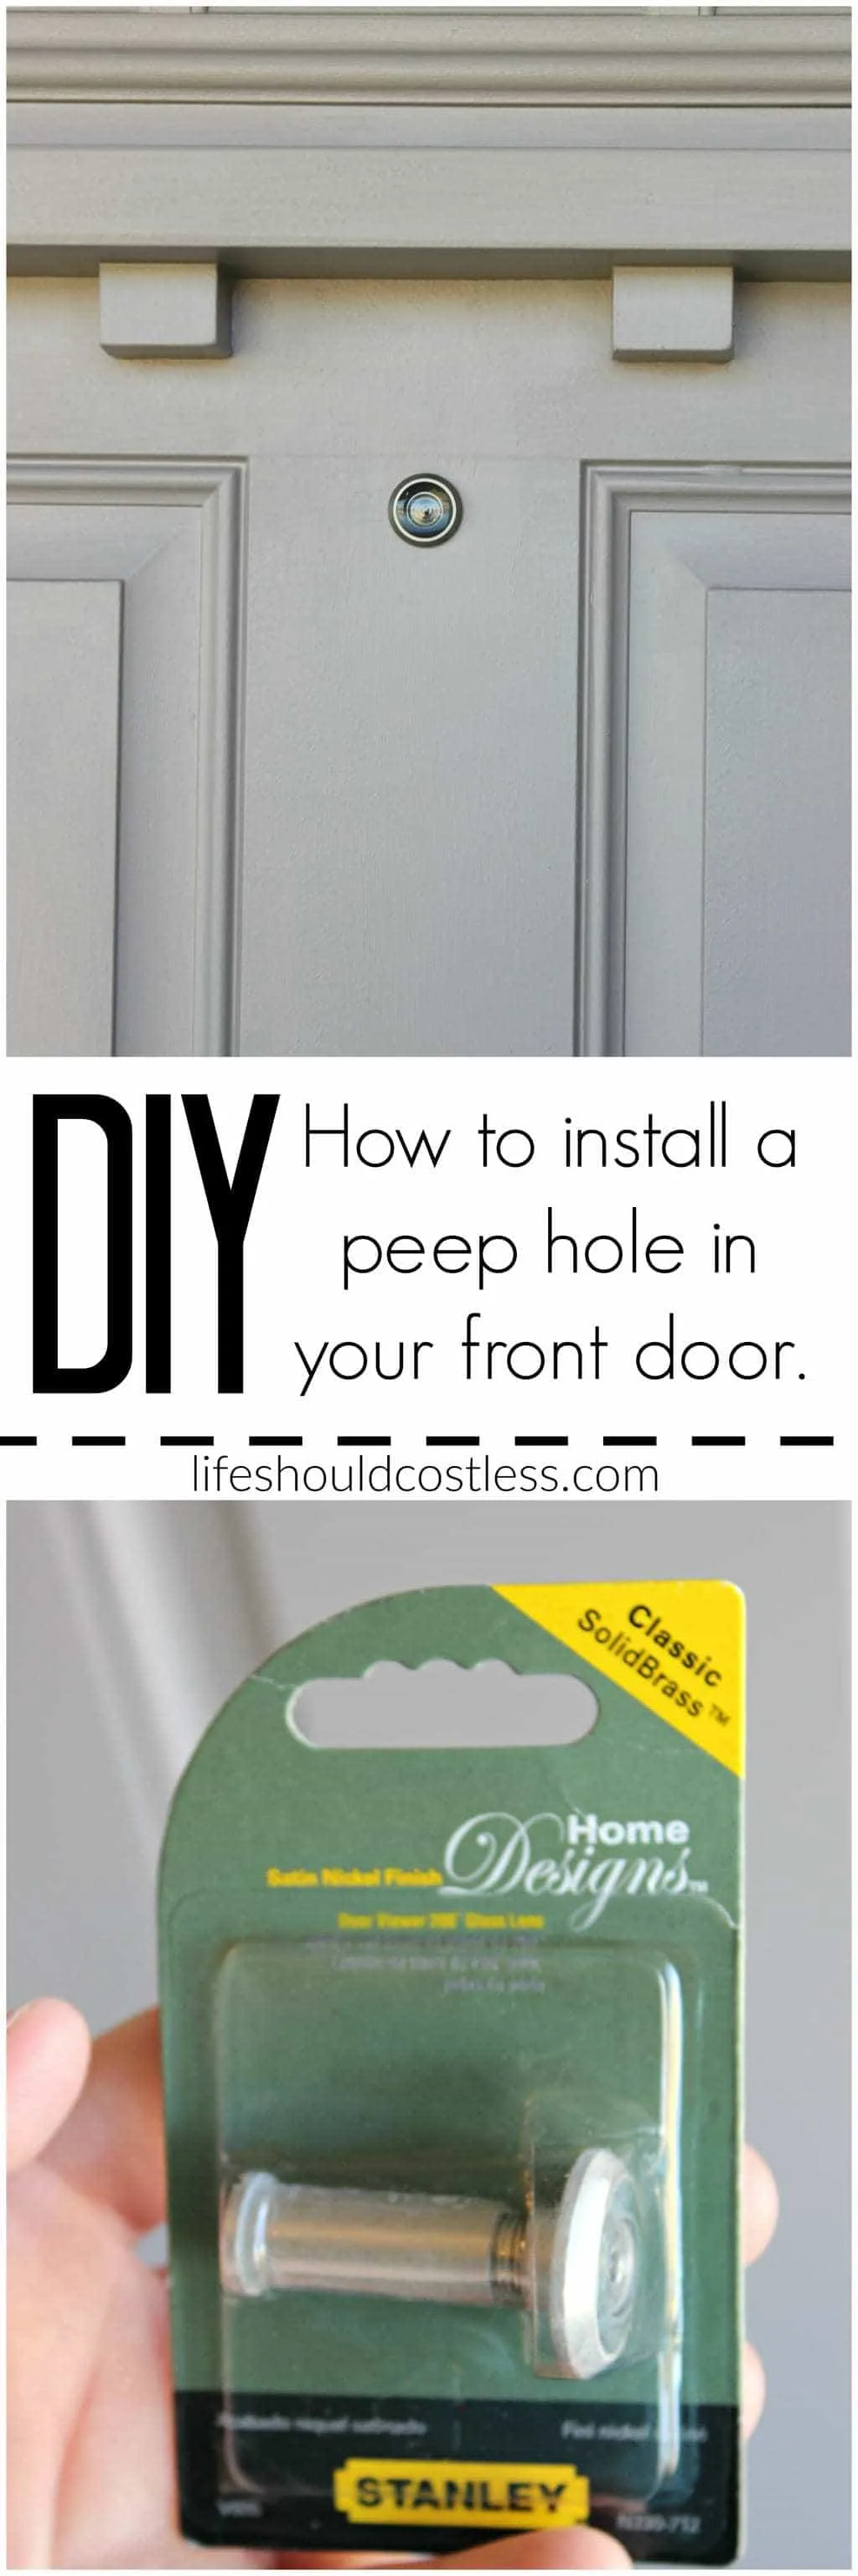 https://lifeshouldcostless.com/wp-content/uploads/2016/08/DIY-How-to-install-a-peep-hole-in-your-front-door.-Its-so-easy-and-inexpensive.jpg.webp